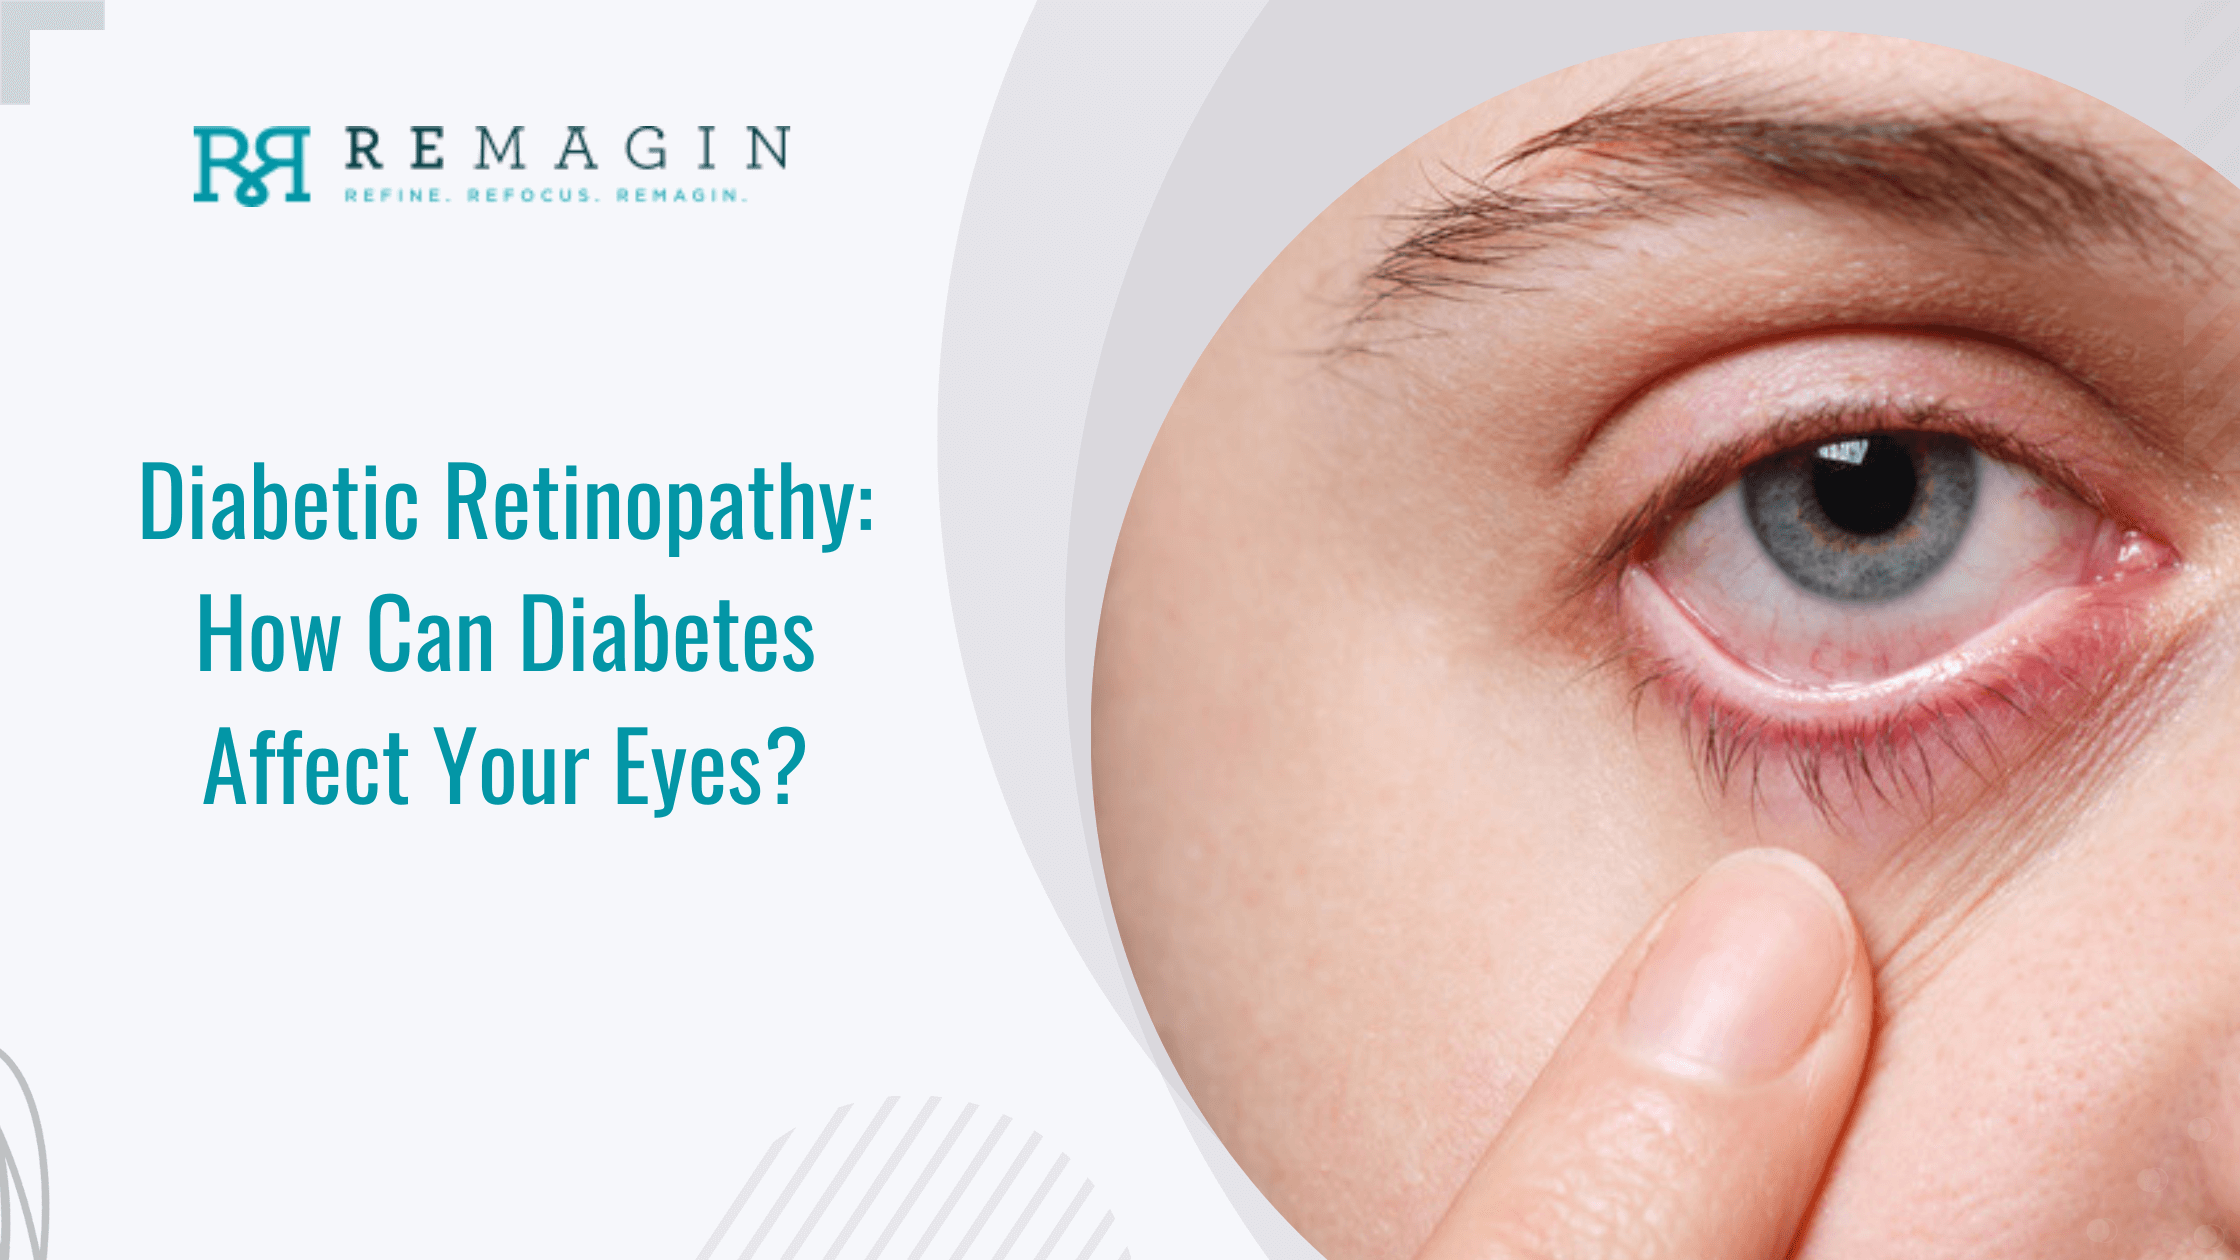 Diabetic Retinopathy: How Can Diabetes Affect Your Eyes?